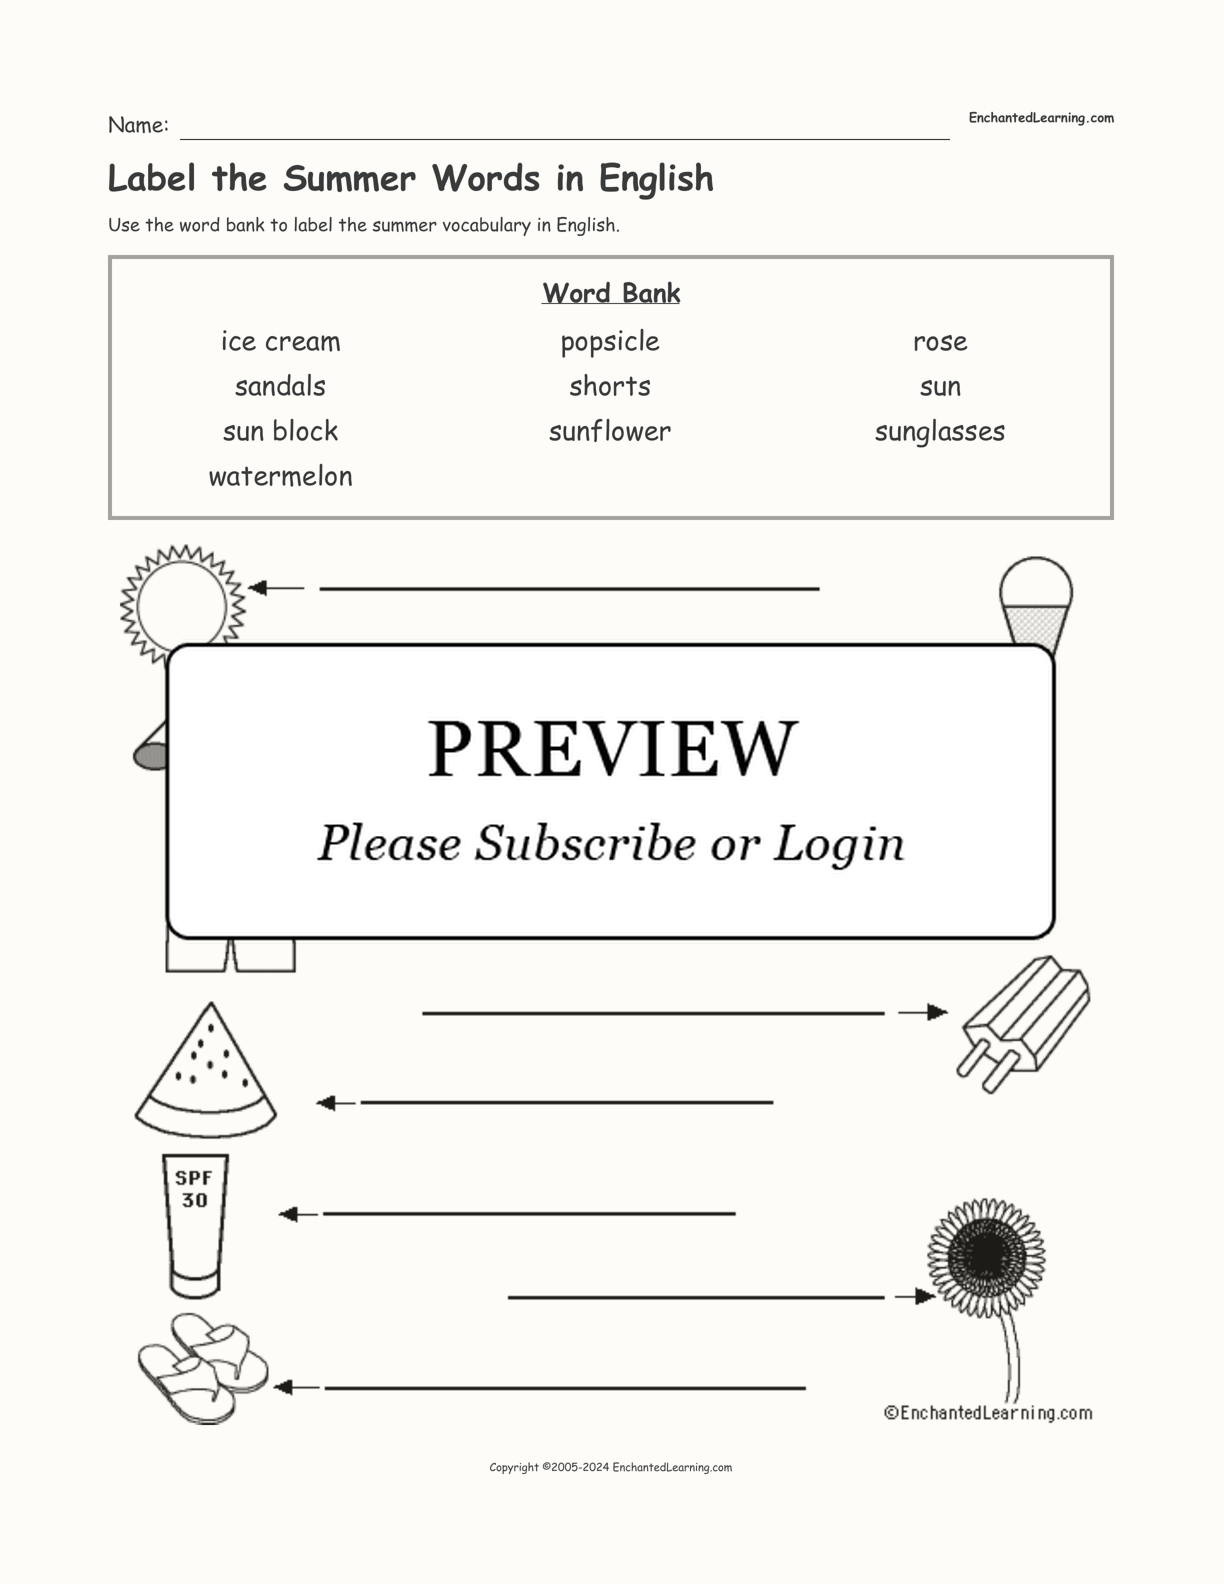 Label the Summer Words in English interactive worksheet page 1